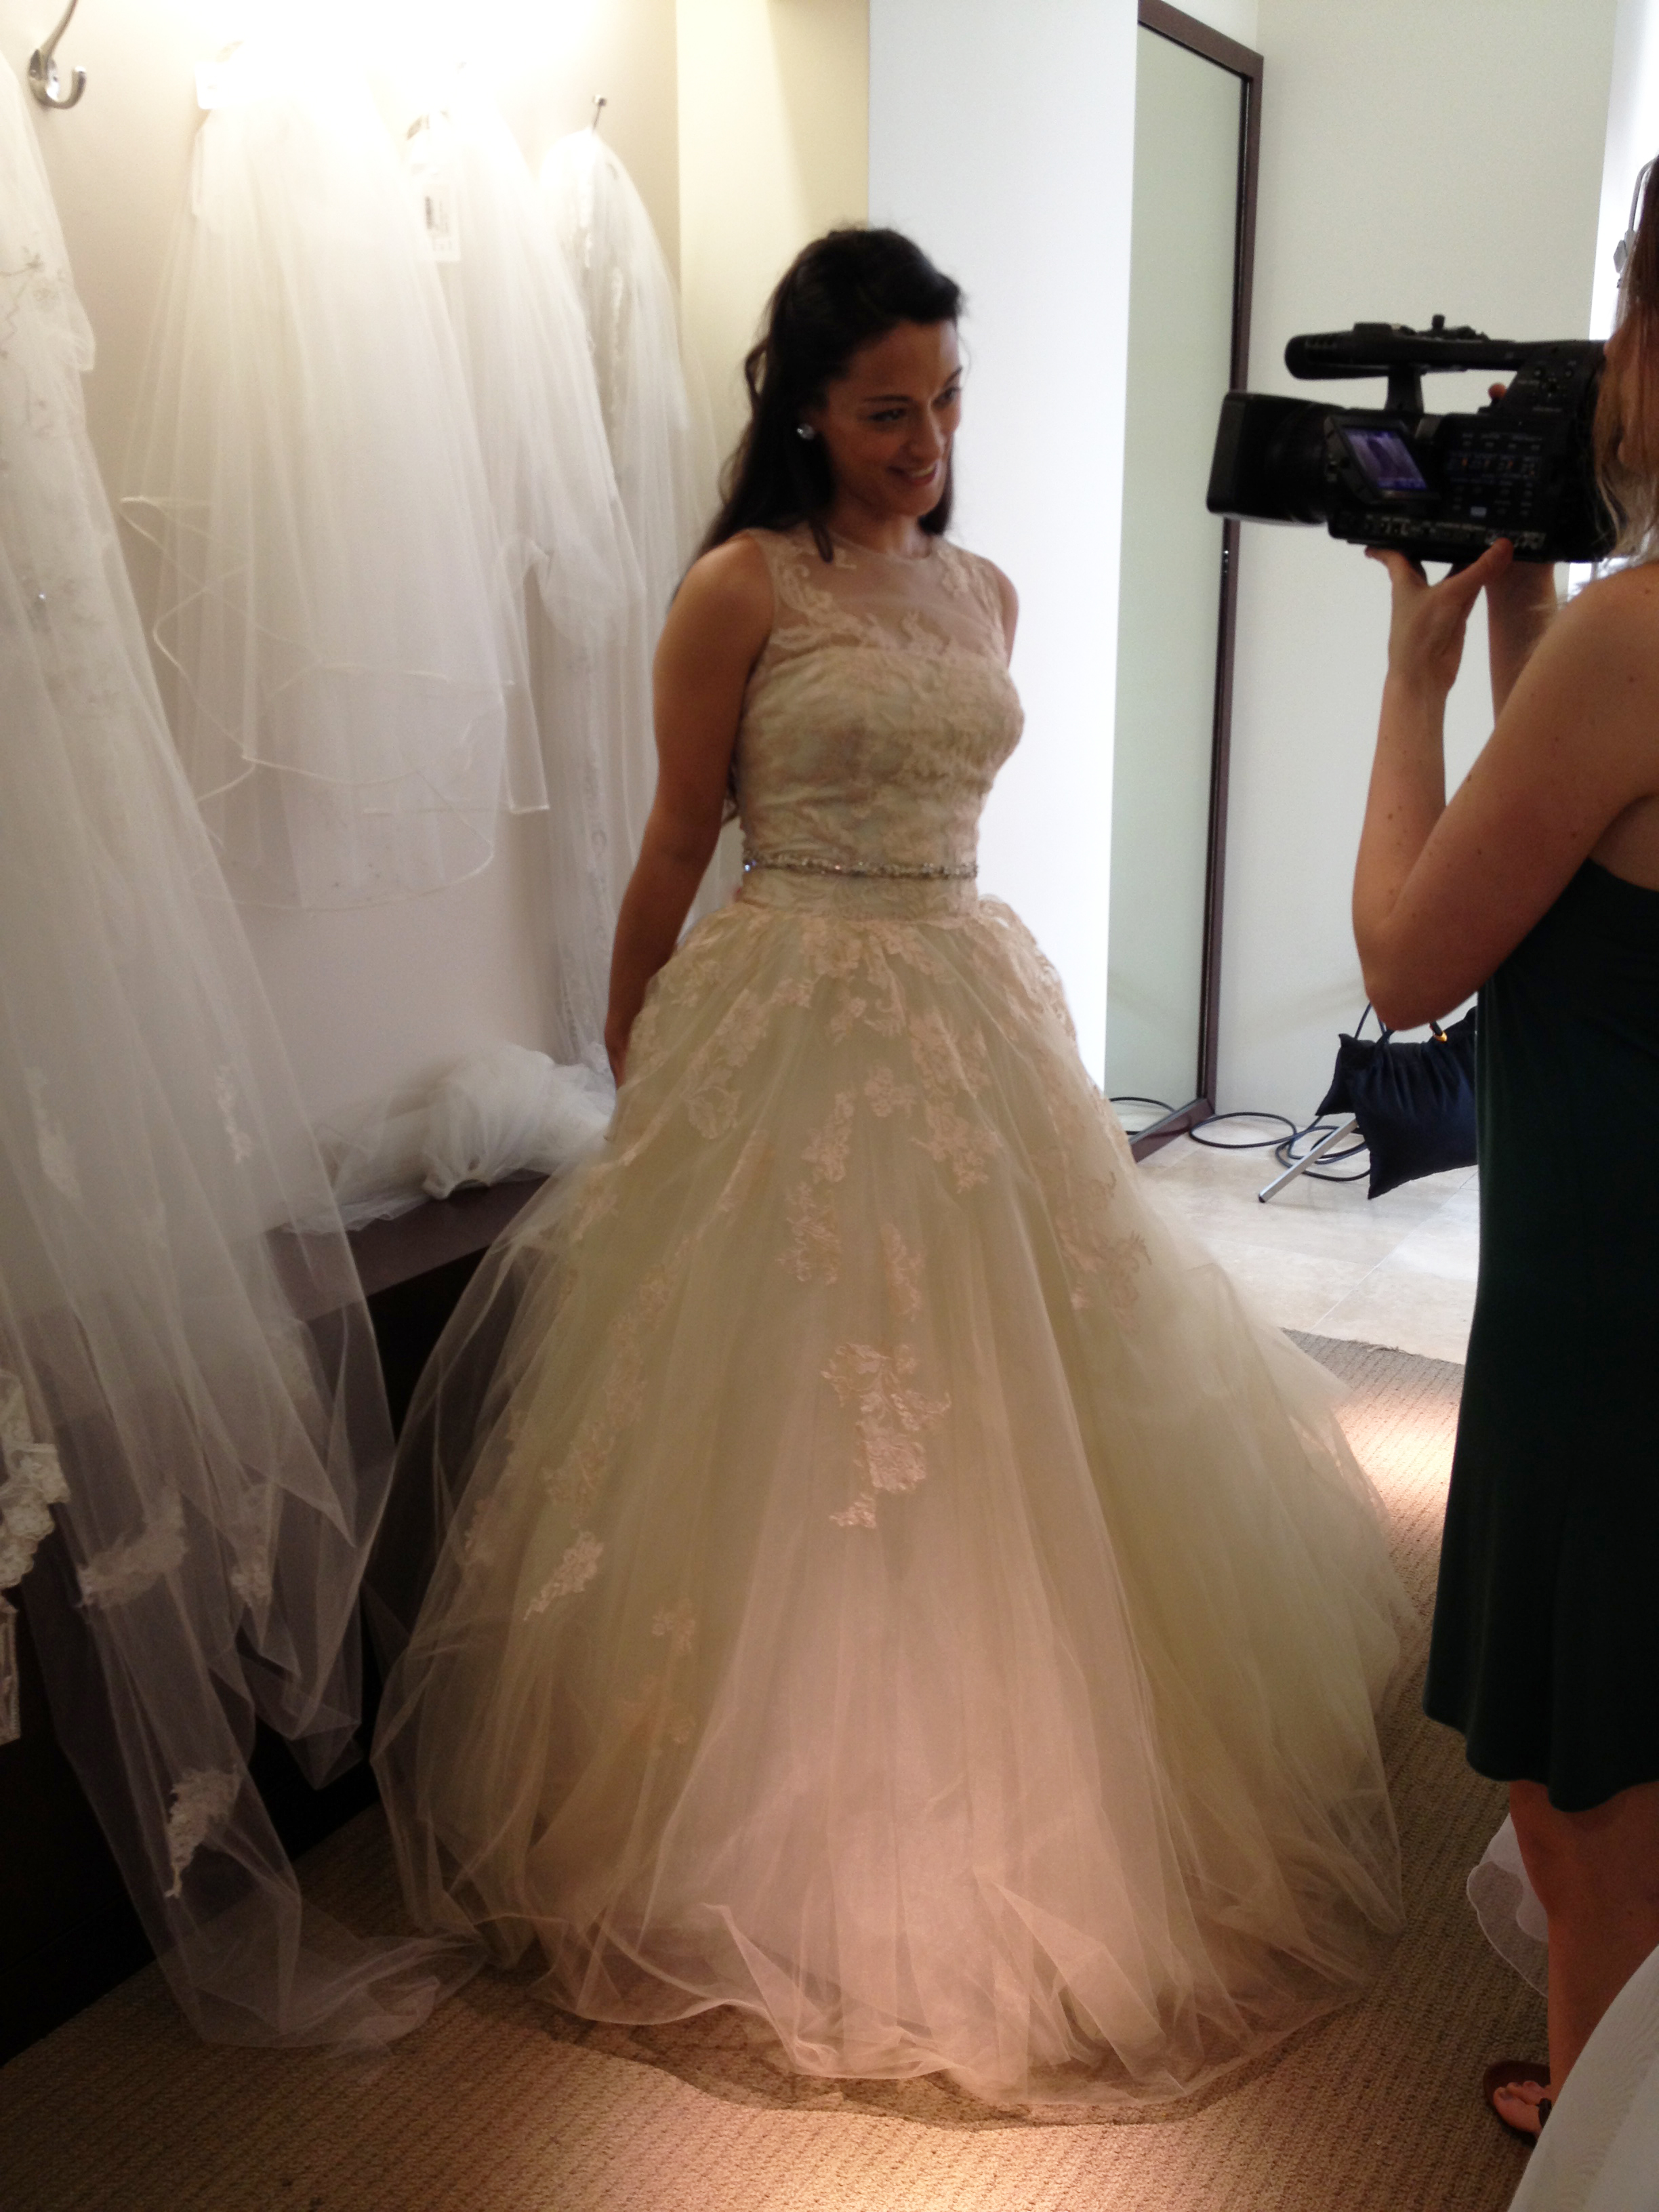 on set of a super fun Commercial Bridal Shoot